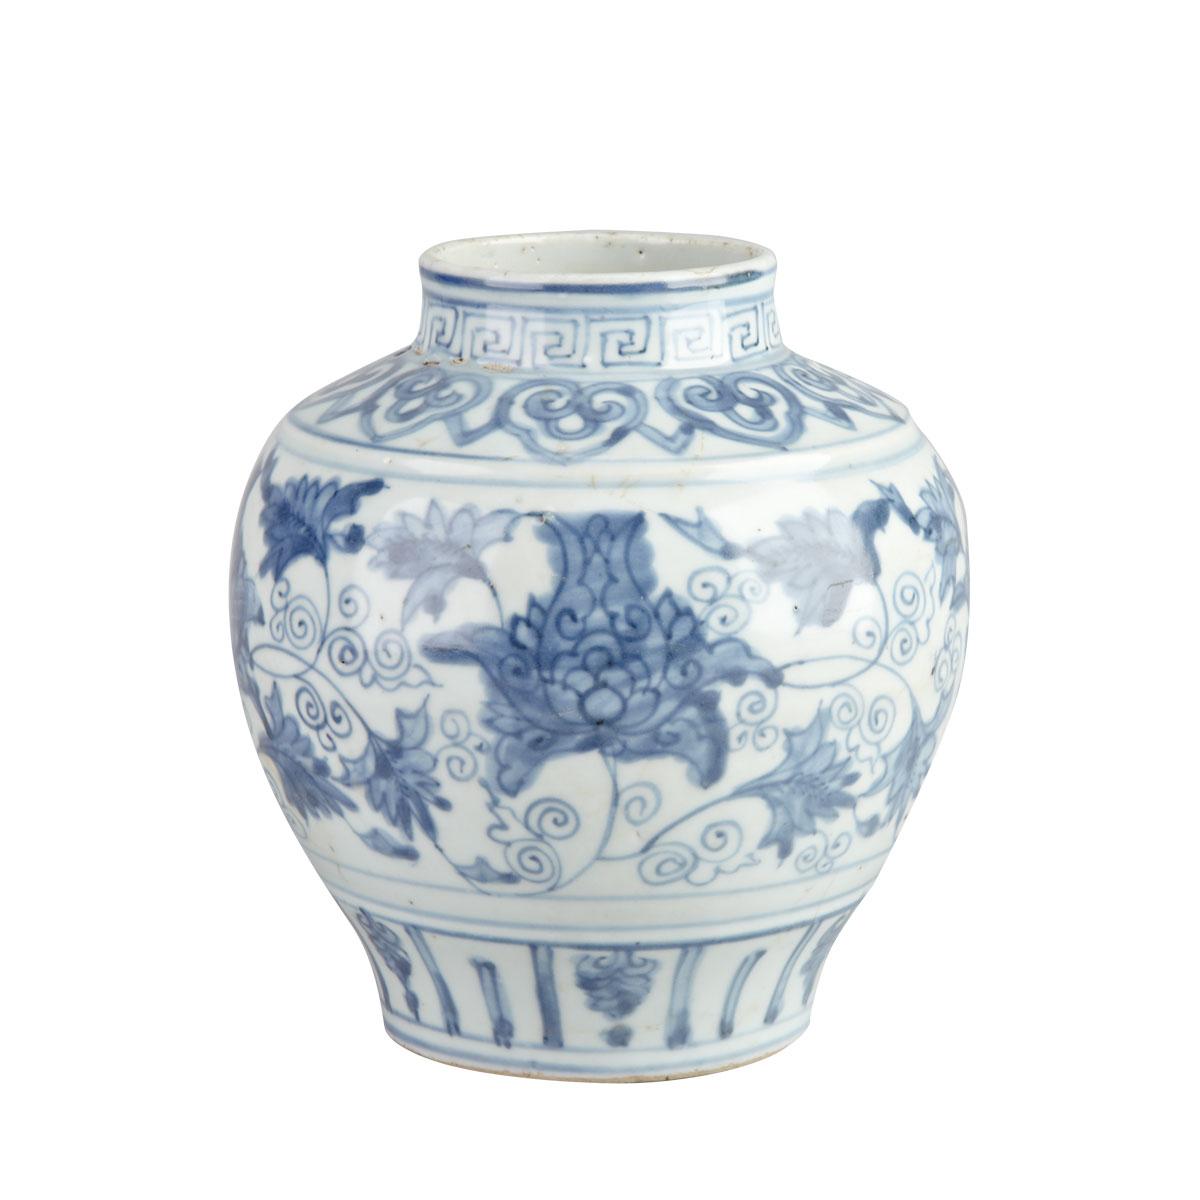 Blue and White Lotus Guan, 16th/17th Century